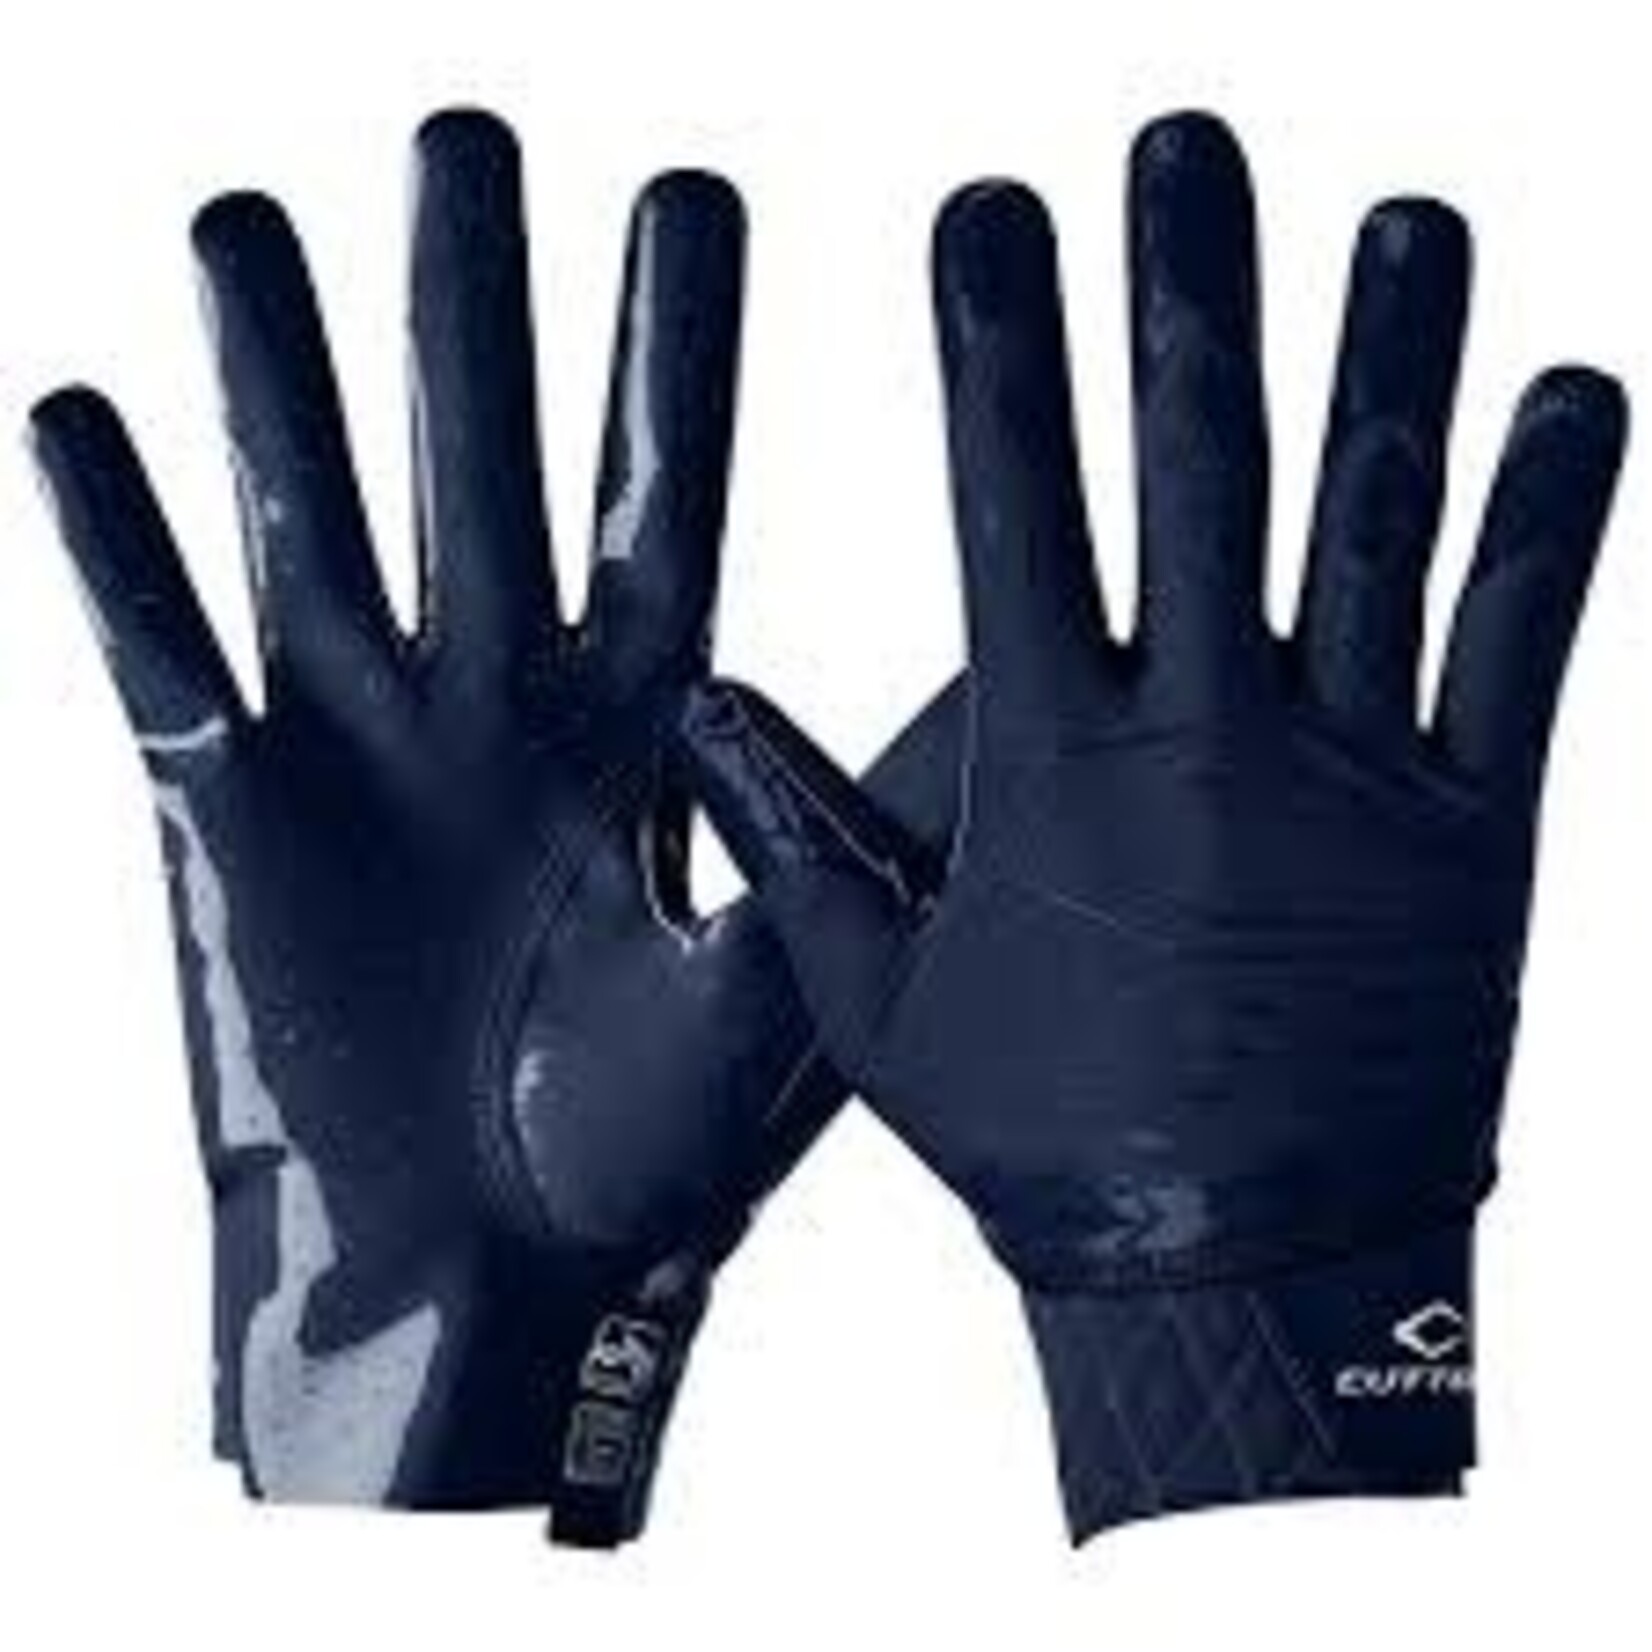 Cutters Cutters Rev Pro 5.0 Receivers Gloves